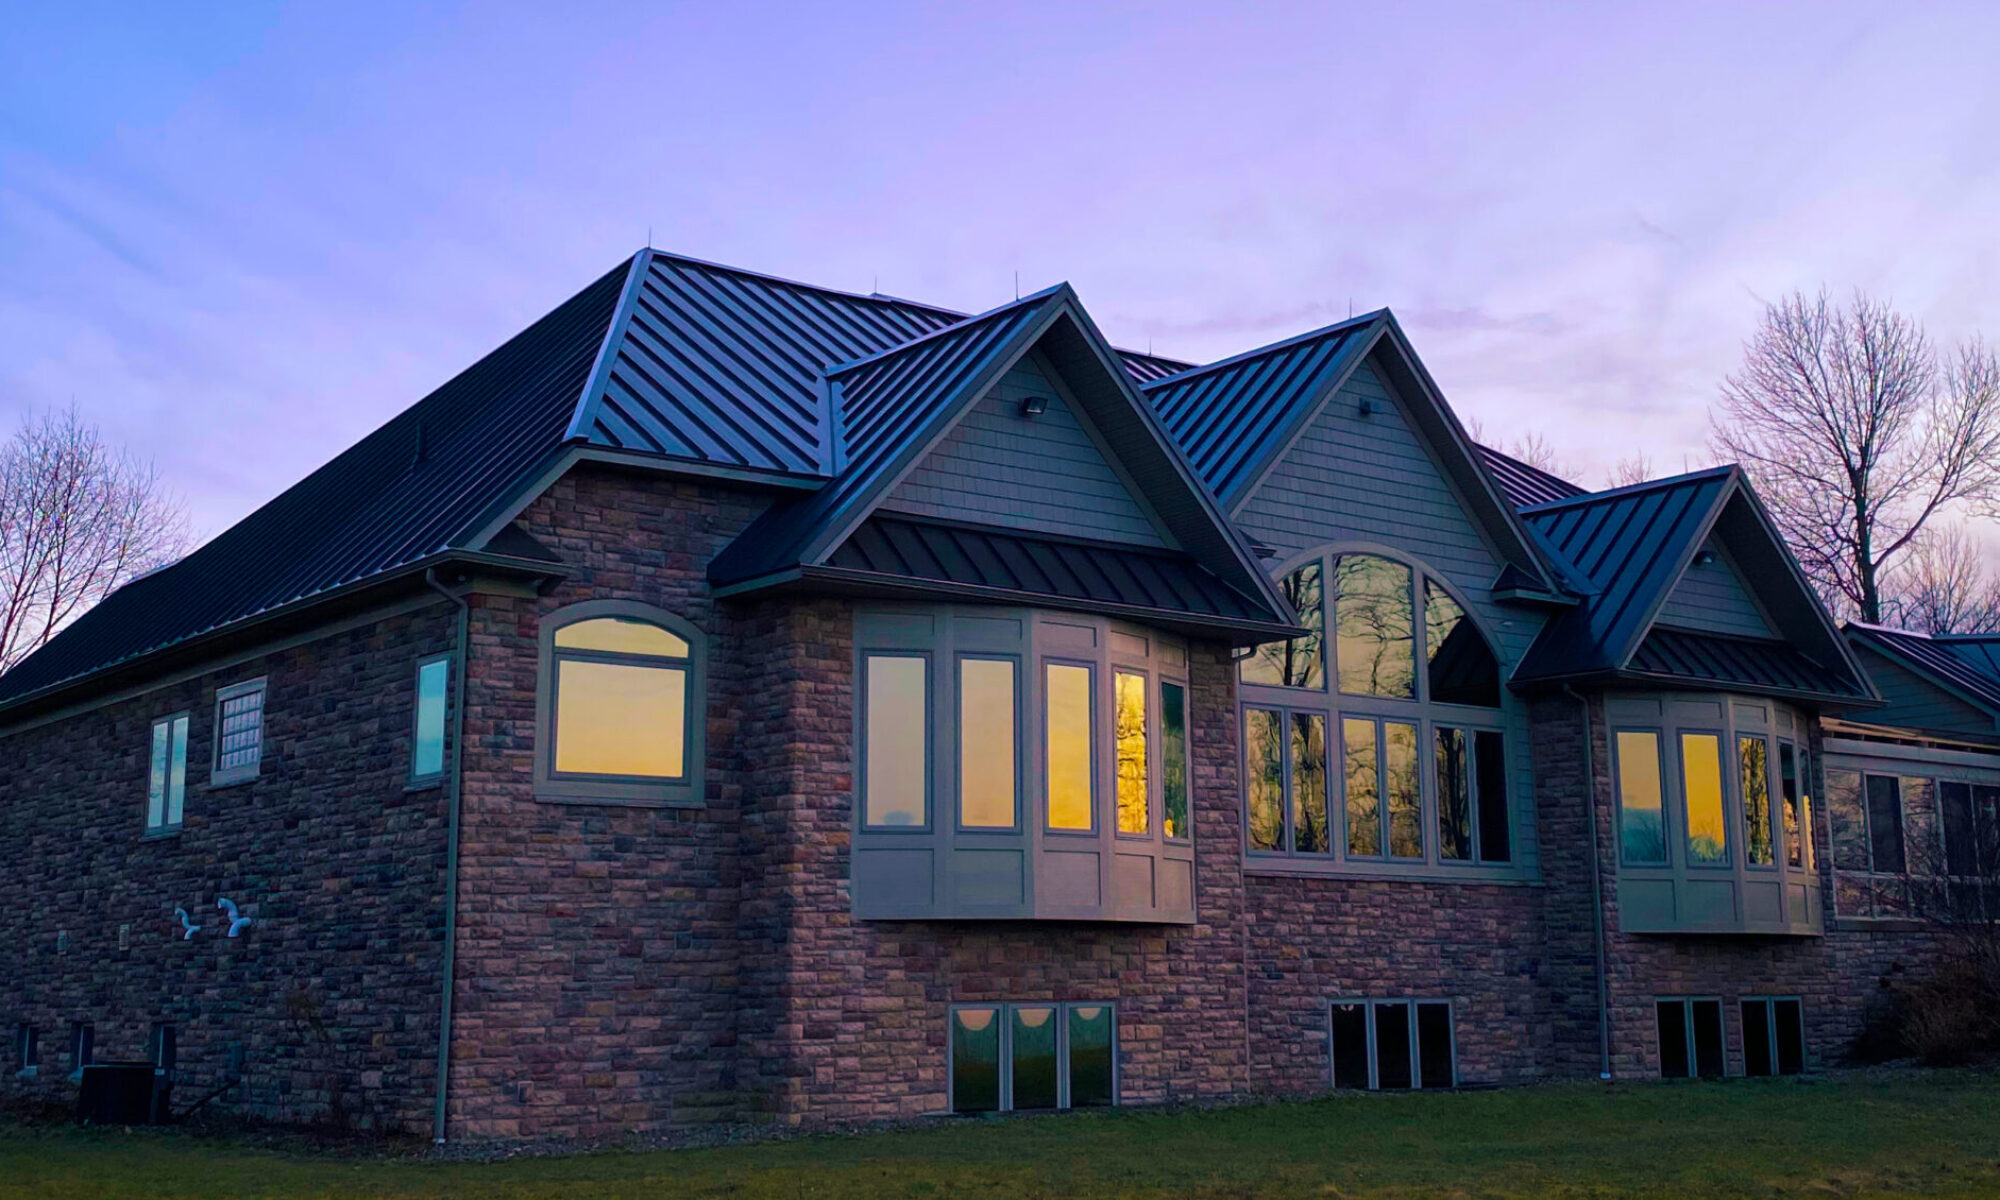 Top roofers in Rochester, NY. Residential & commercial expertise. Specializing in shingle, metal, and solar roofing. Installation & repair specialists.